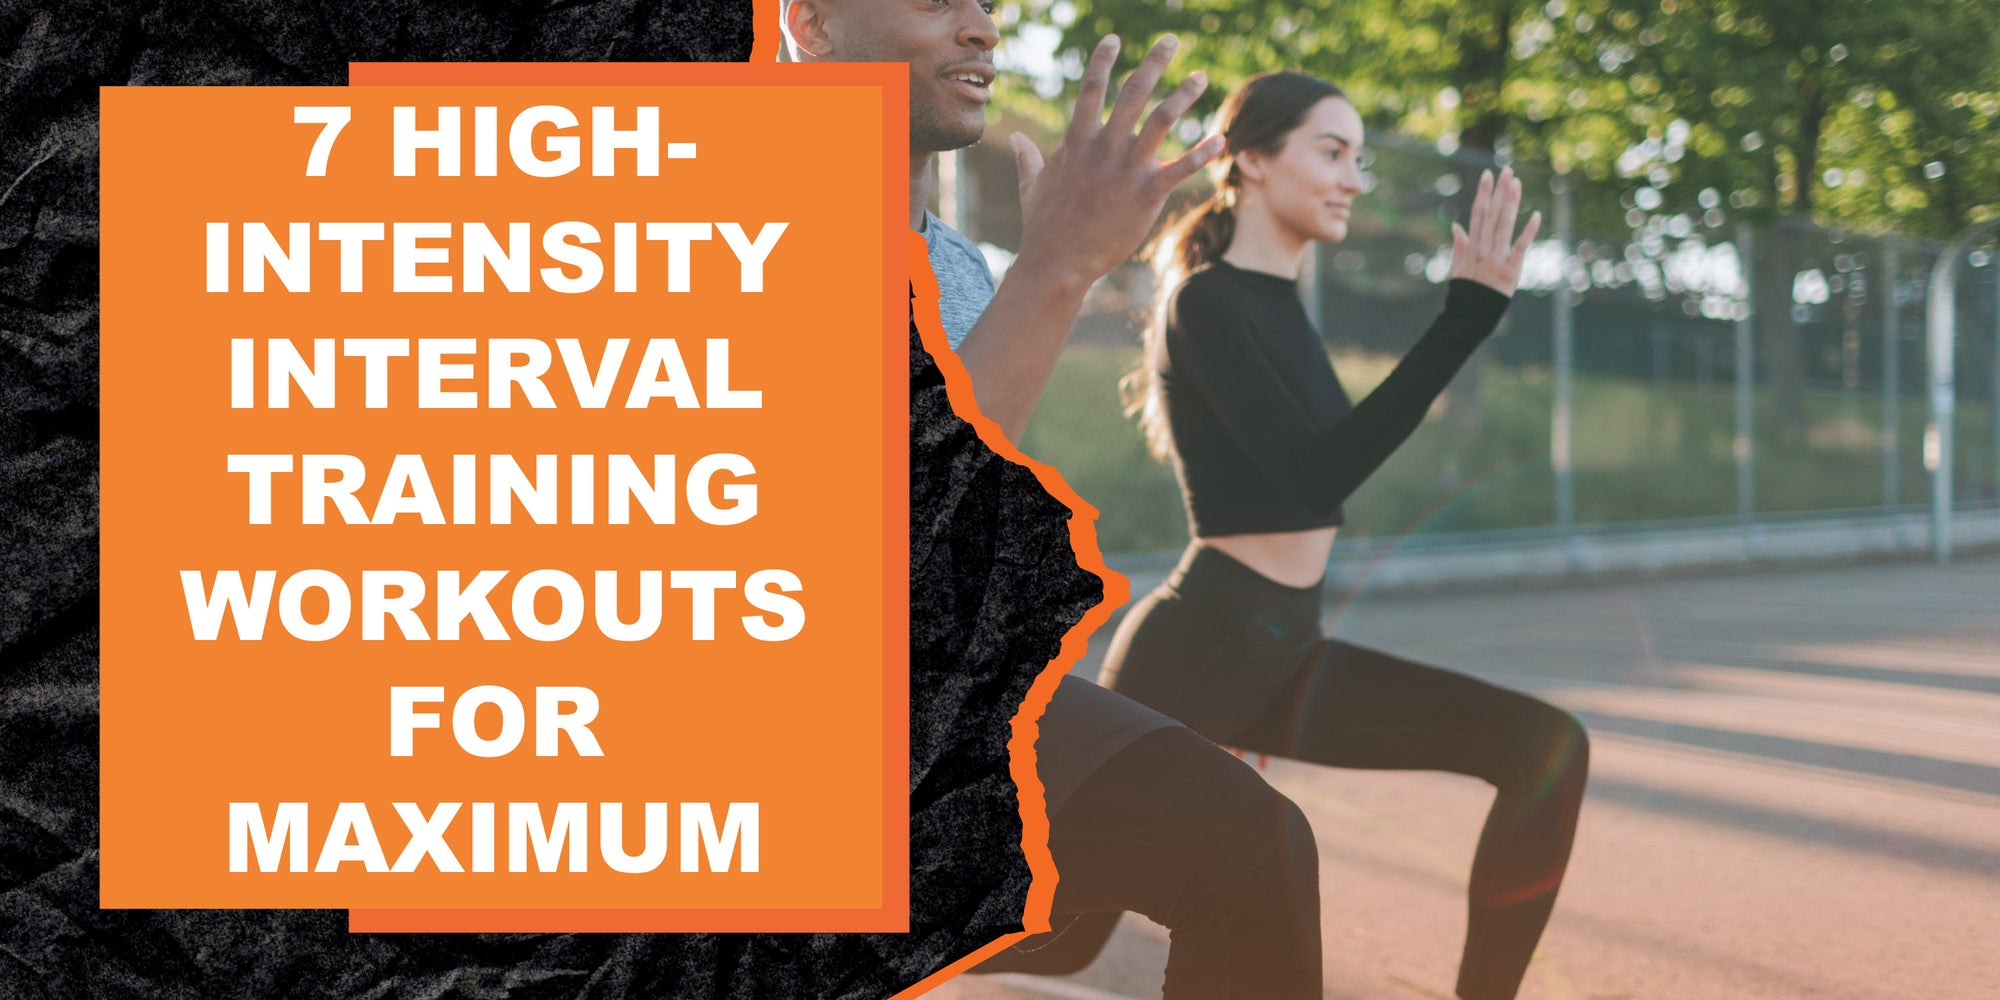 7 High-Intensity Interval Training Workouts for Maximum Results